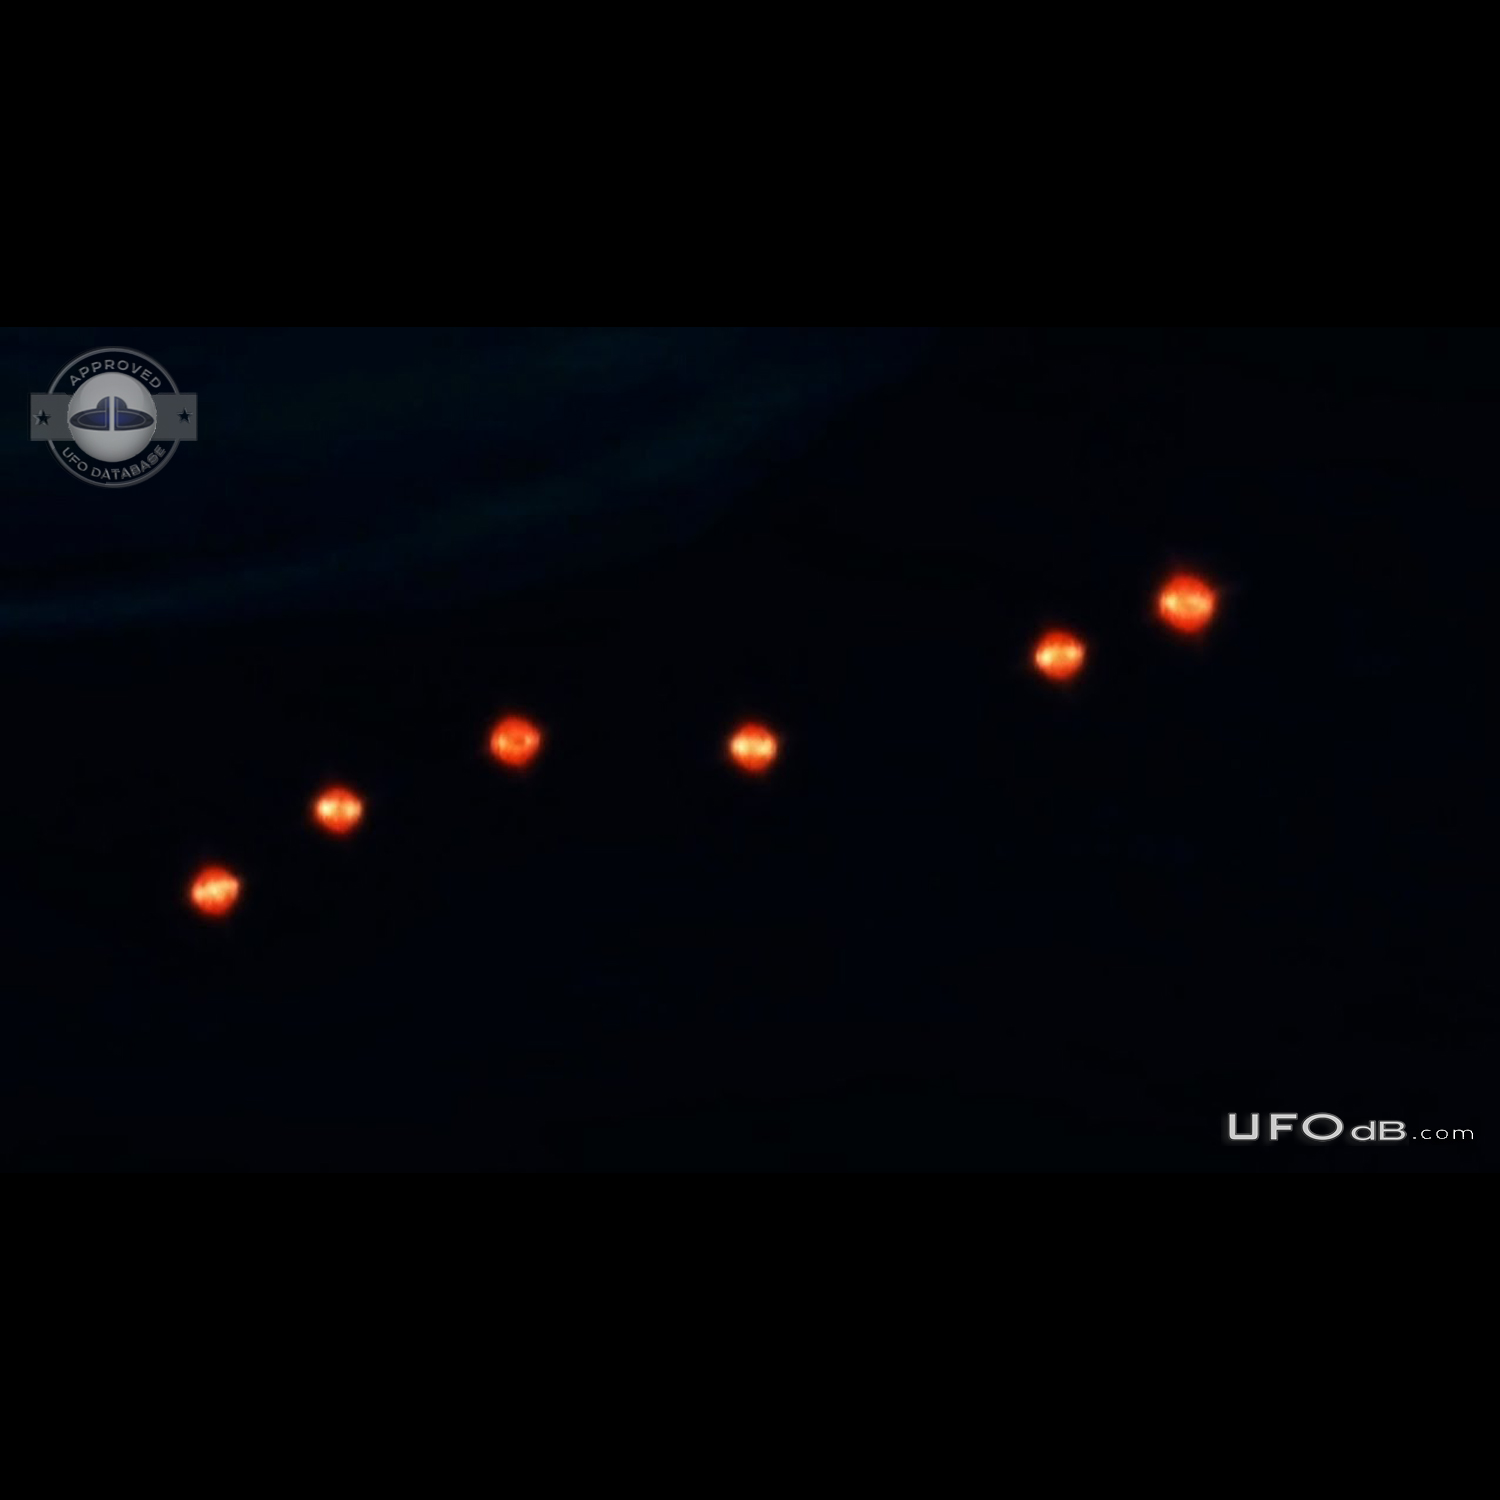 Unusual bright lights UFO not shooting stars or satellites look like t UFO Picture #723-1